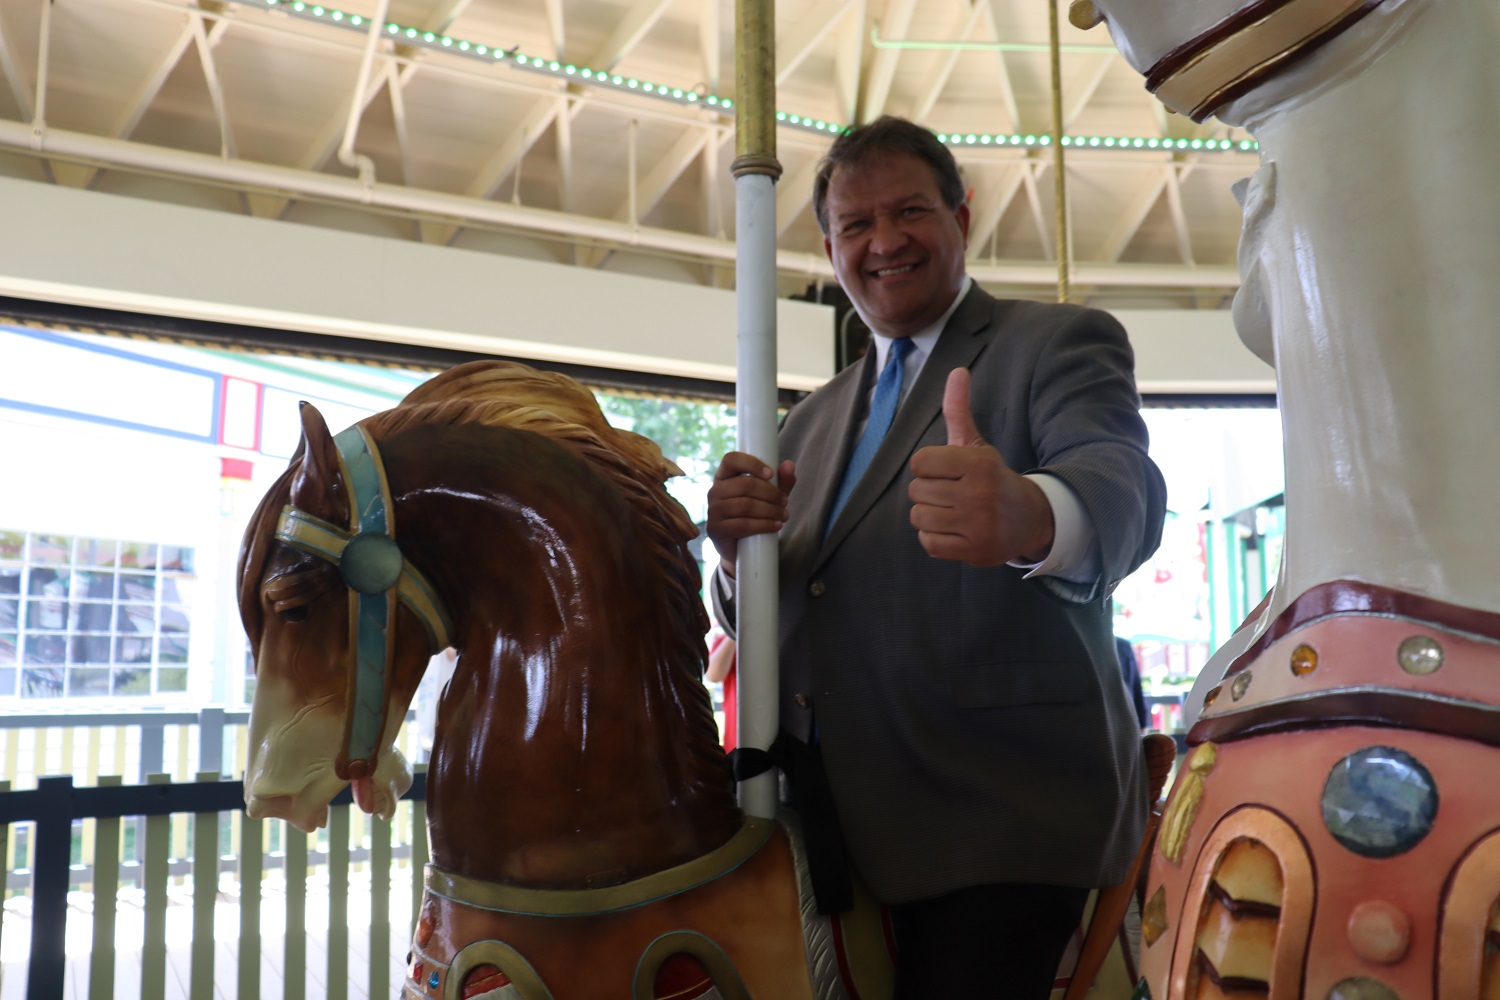 PLAYLAND 2021 SEASON OPEN AT NOON. DERBY RACER RIDES AGAIN. CAROUSEL ...